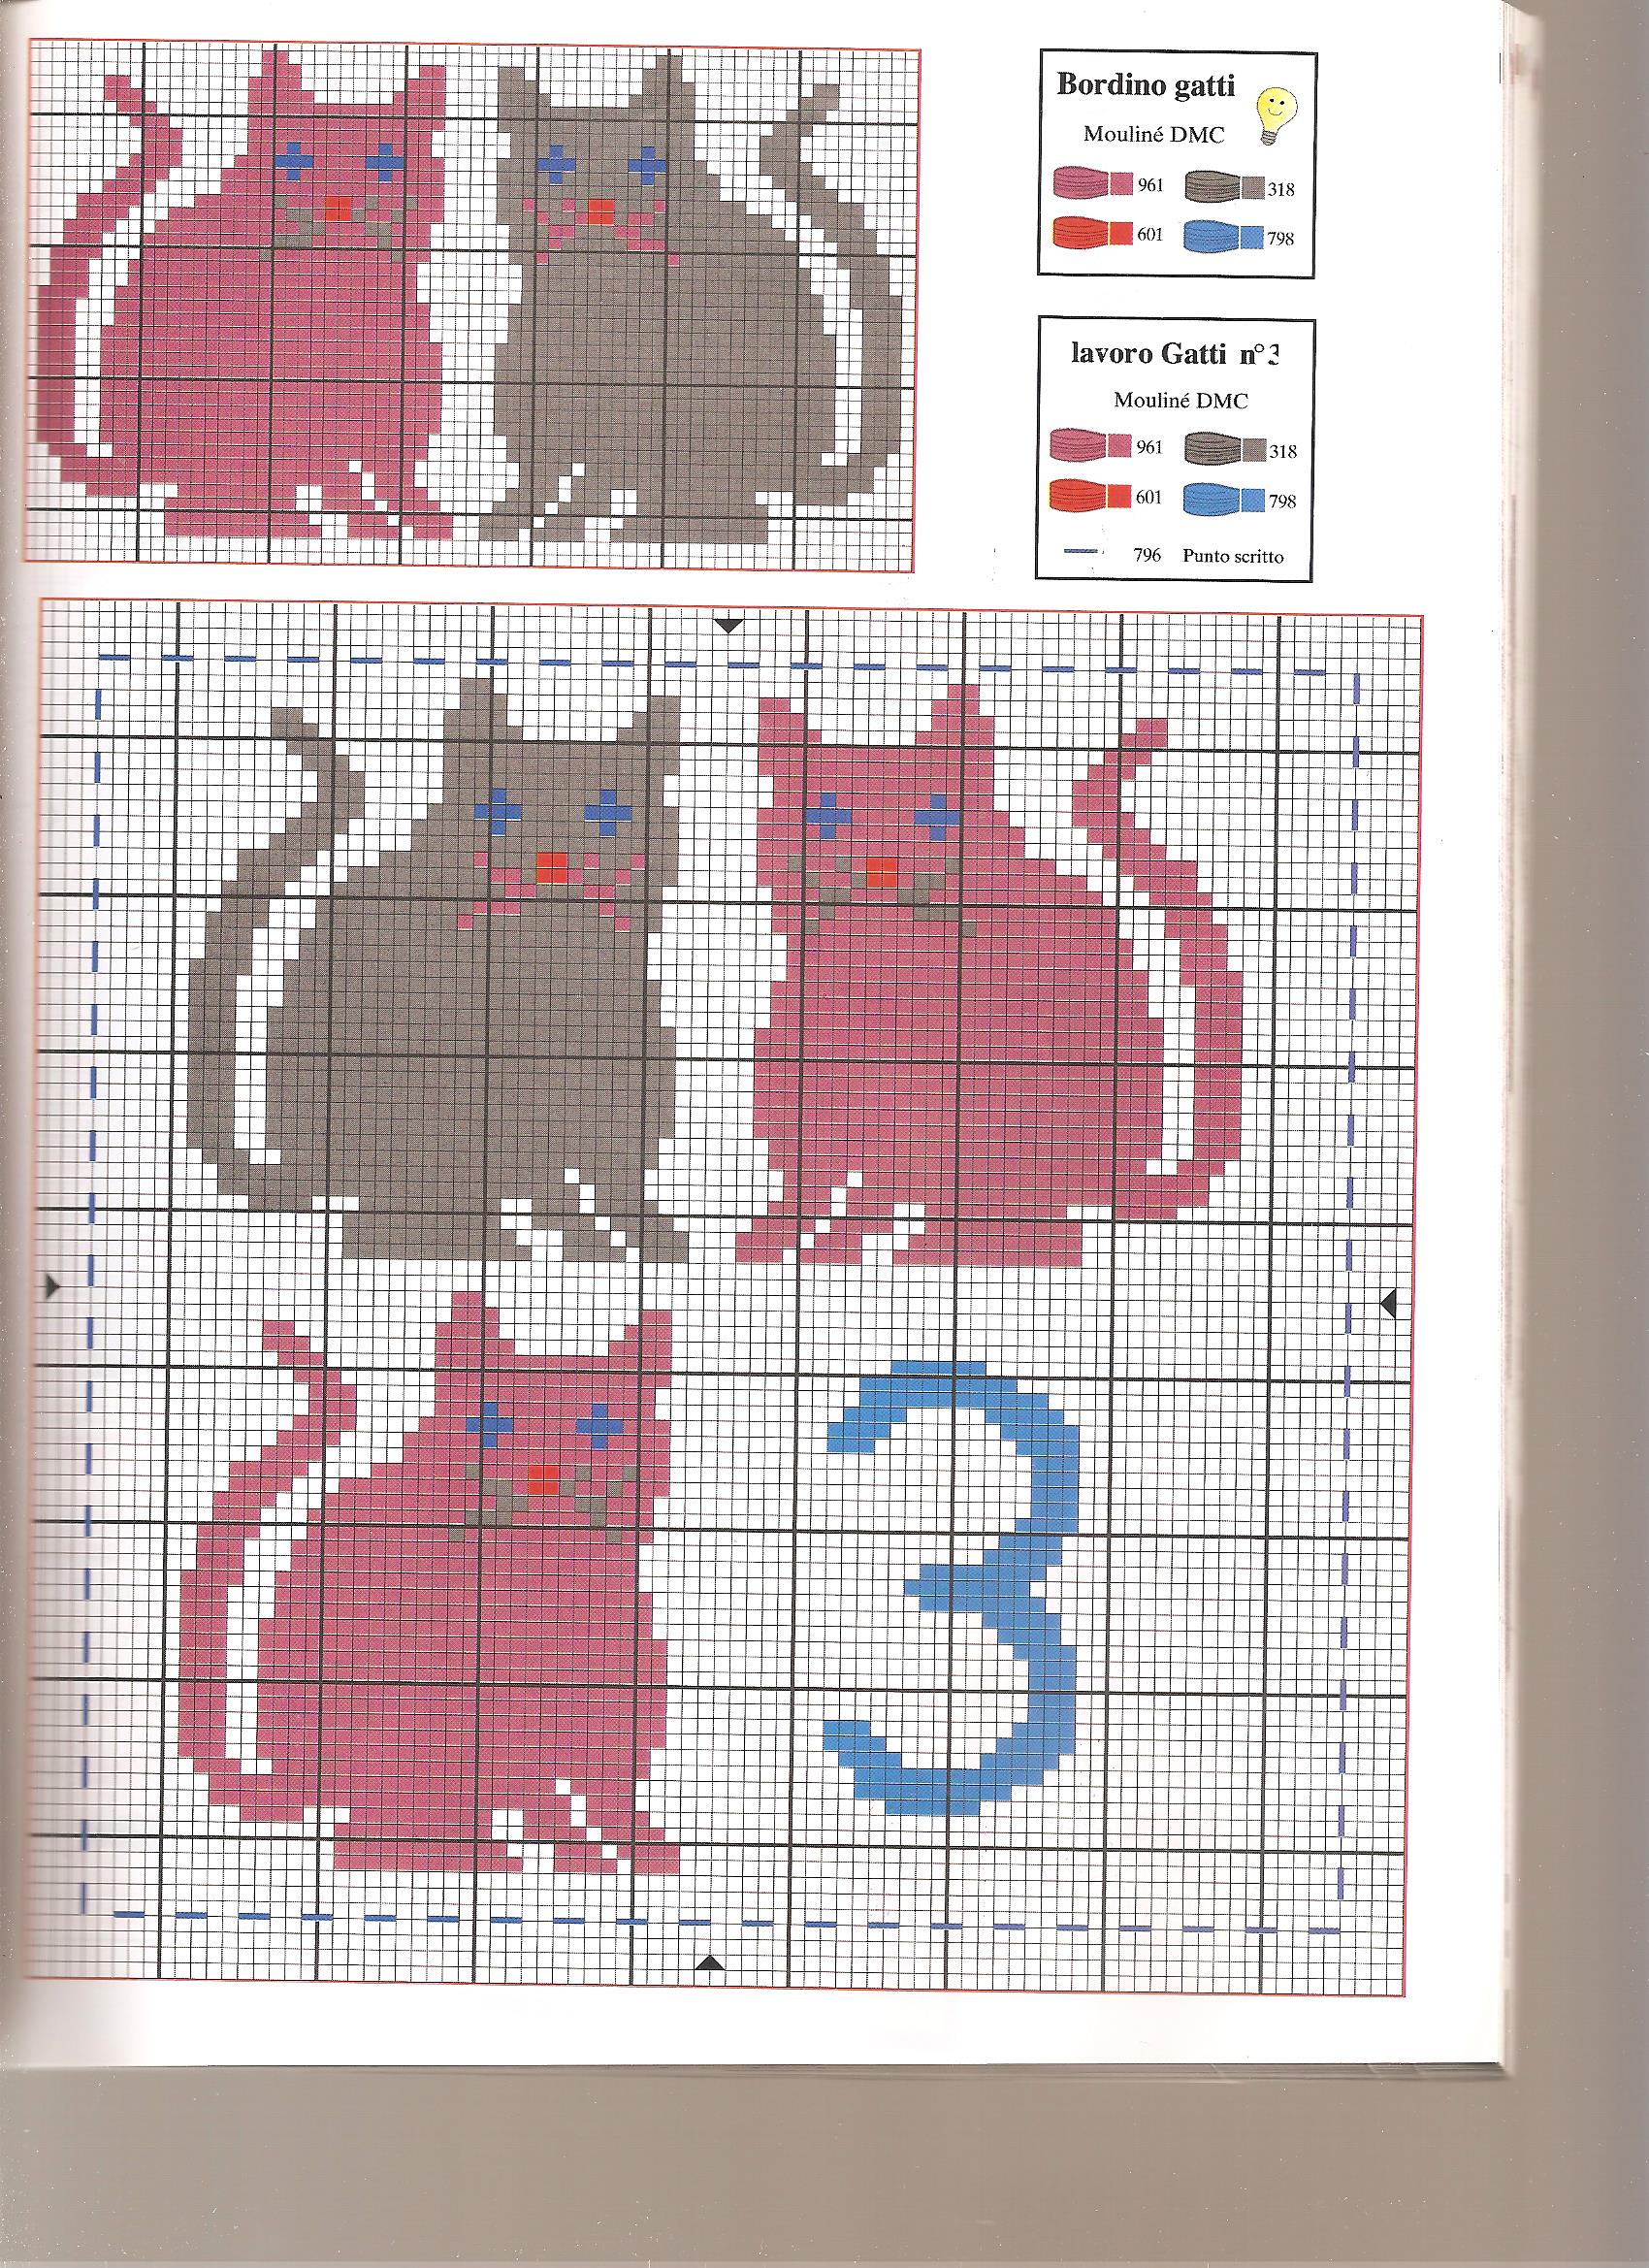 Cross stitch panel let’ s learn to count! (9)